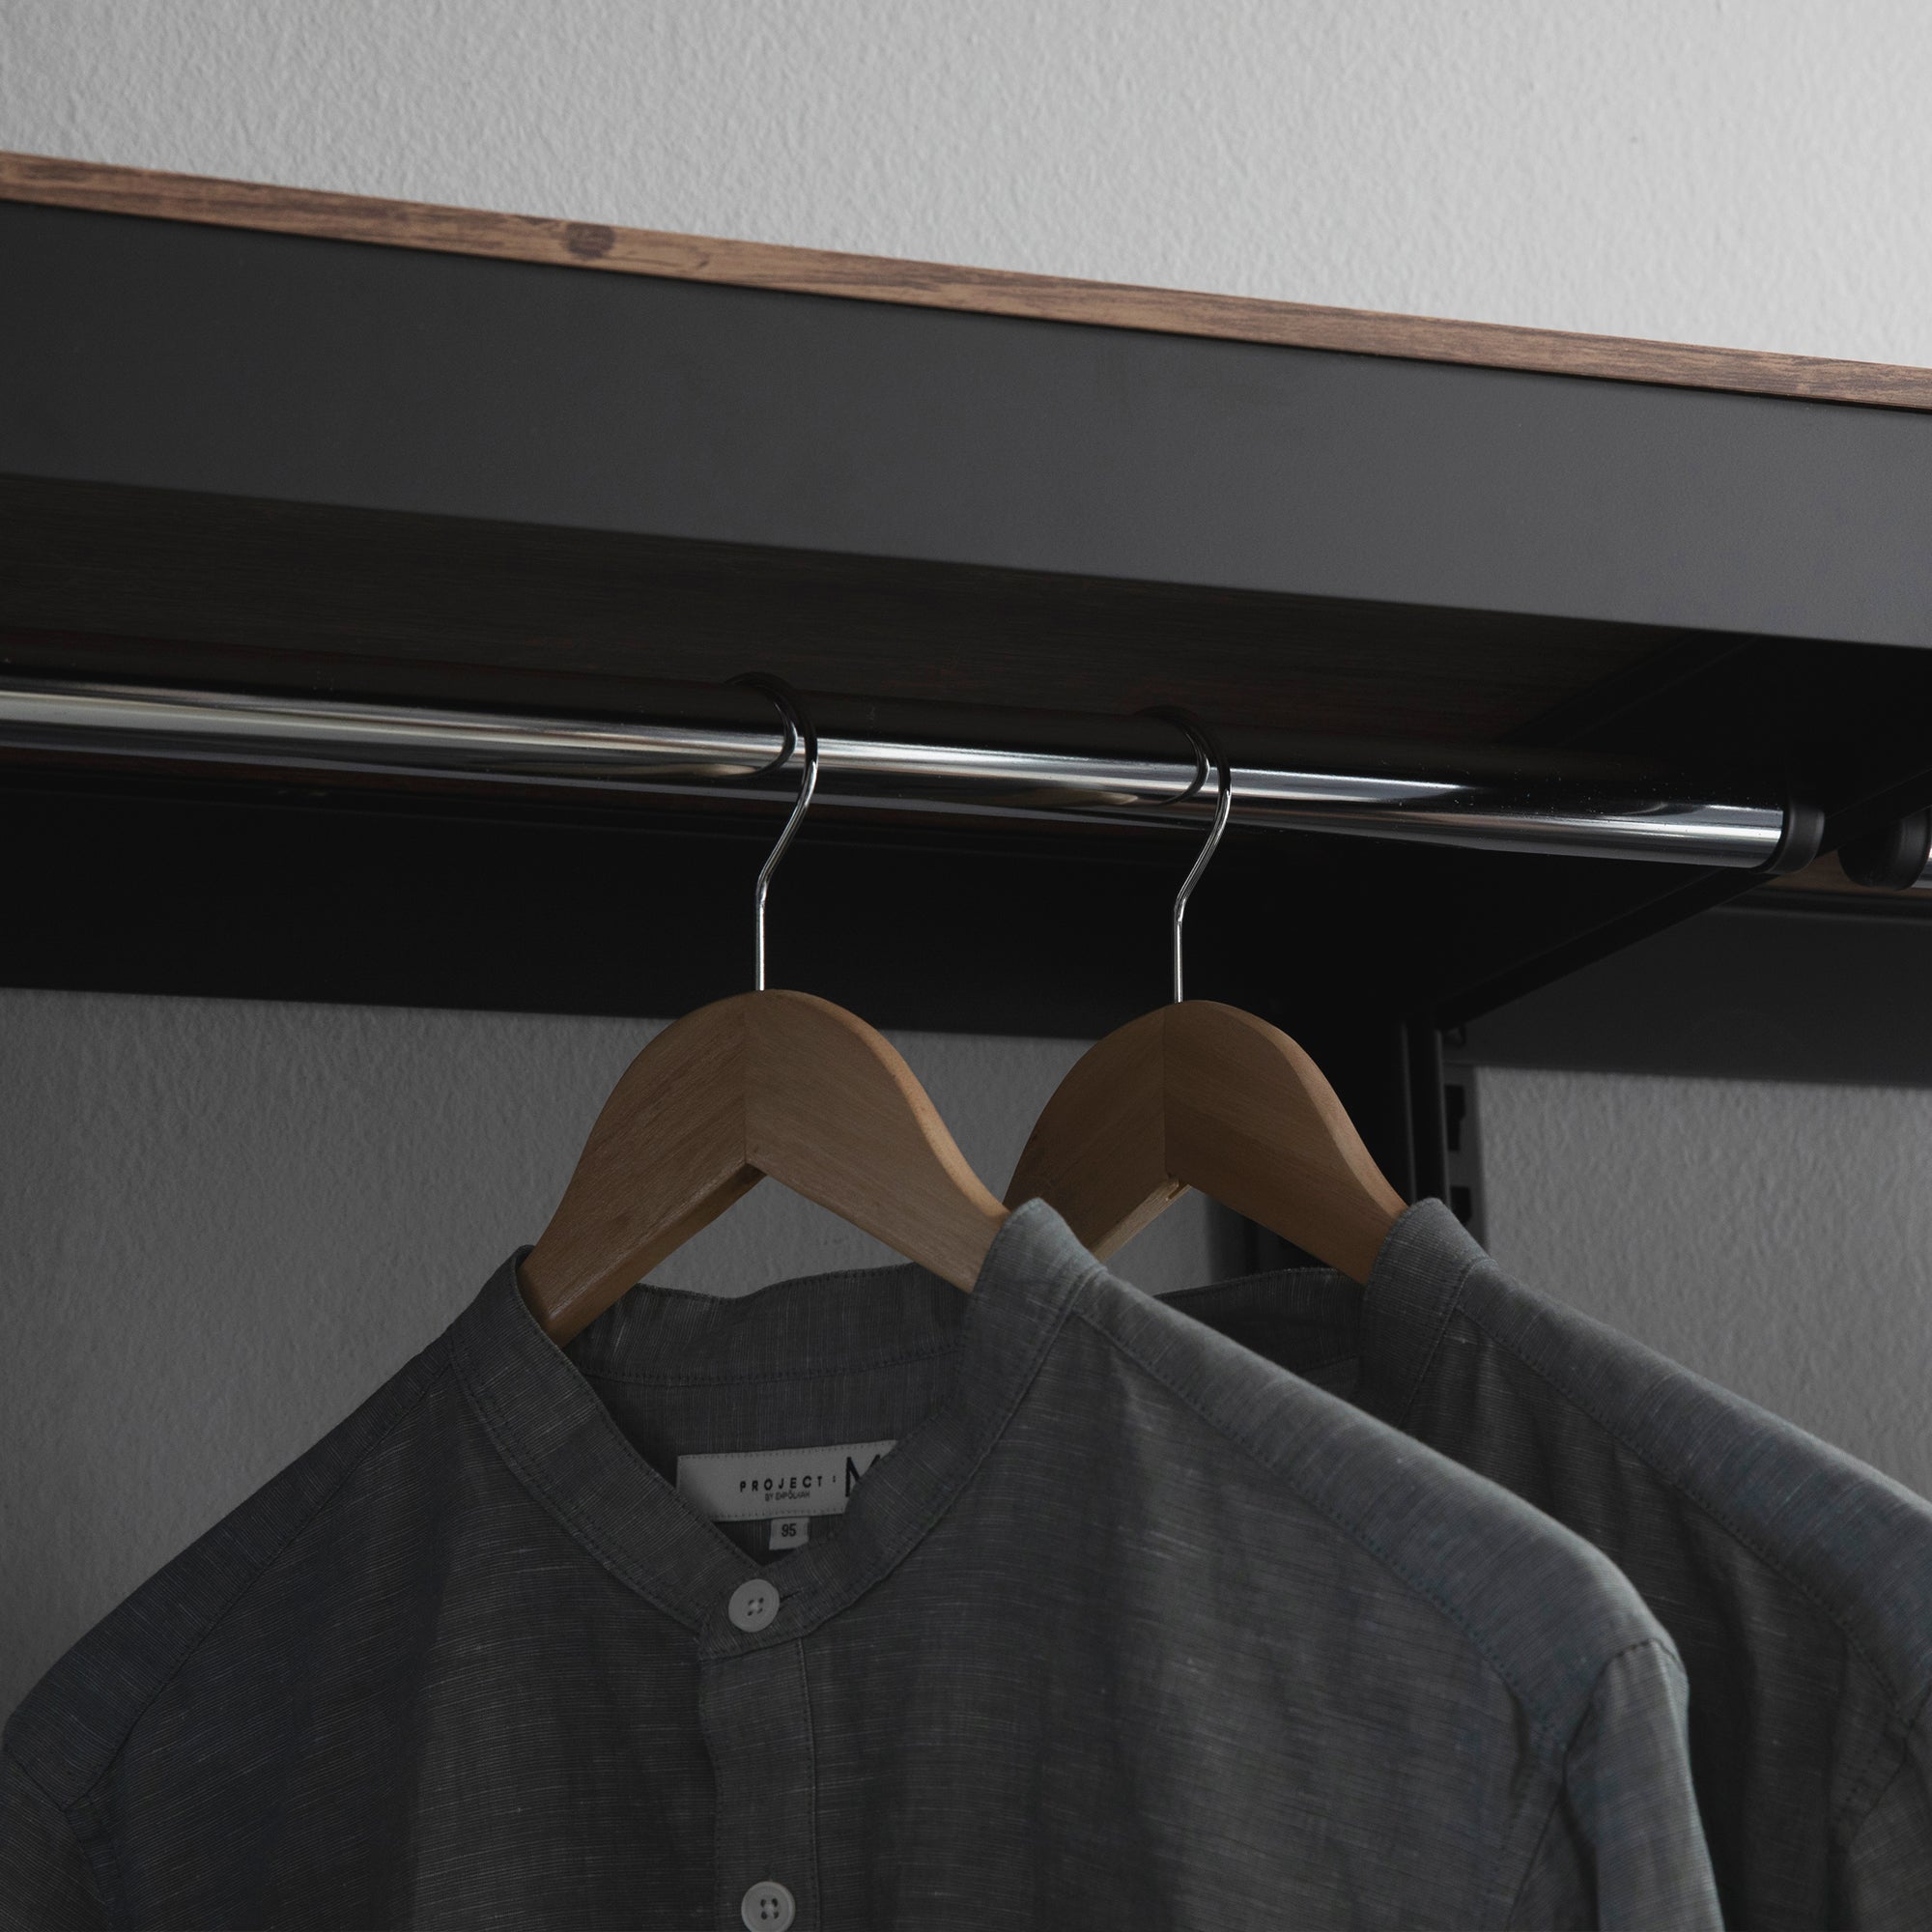 The Classic Two Tier Clothing Rack in Black - 2 Sets